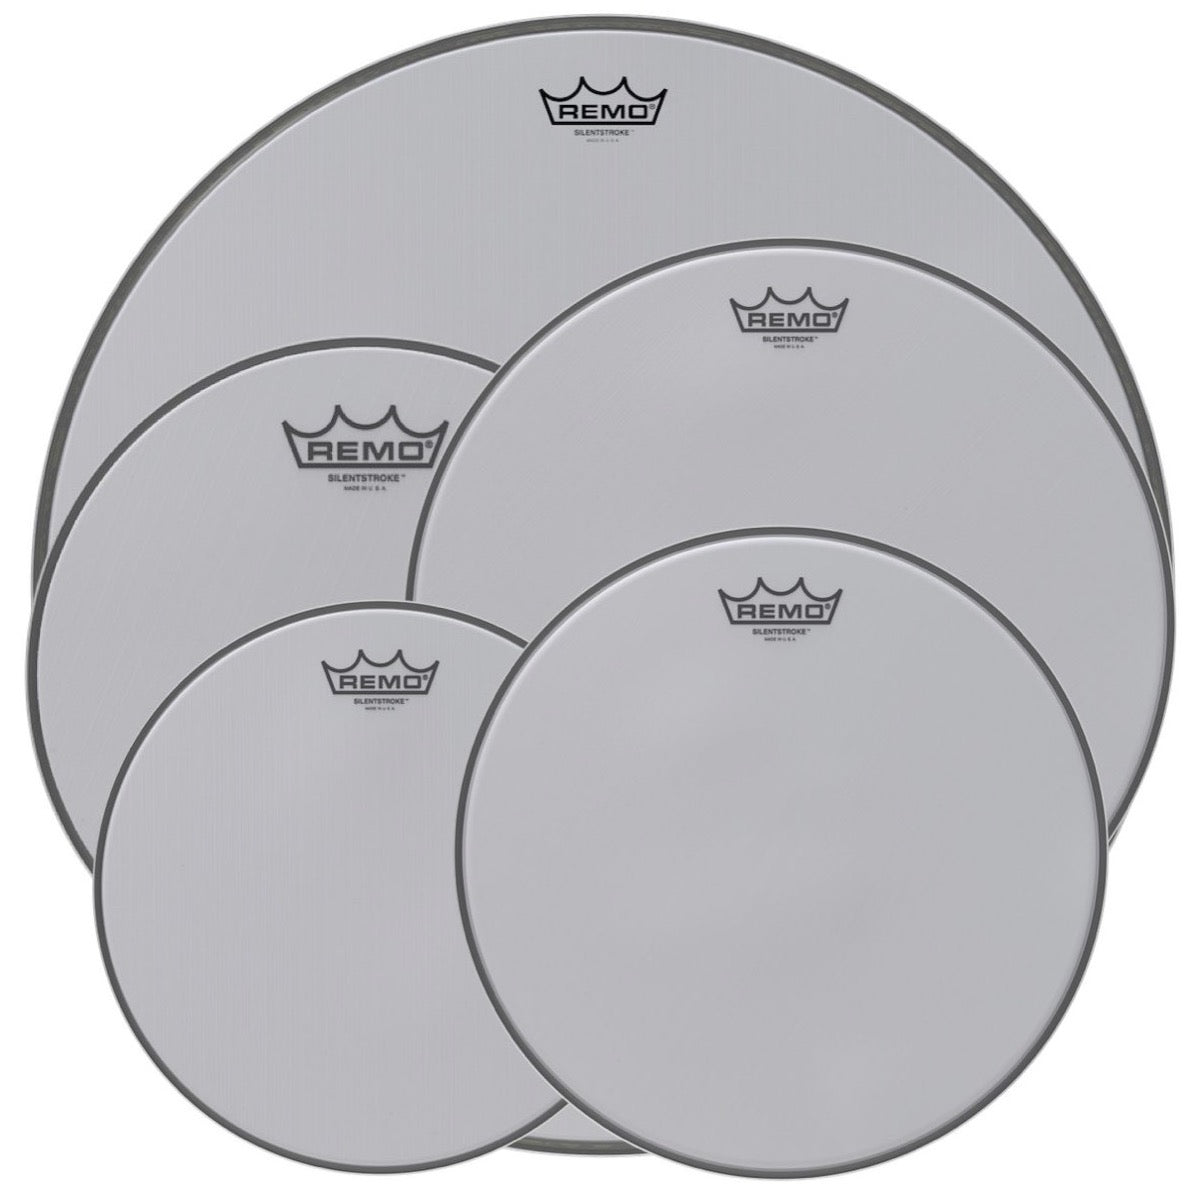 Remo Silentstroke ProPack Drumheads, White, 12, 13, 14, 16, and 22-Inch Pack